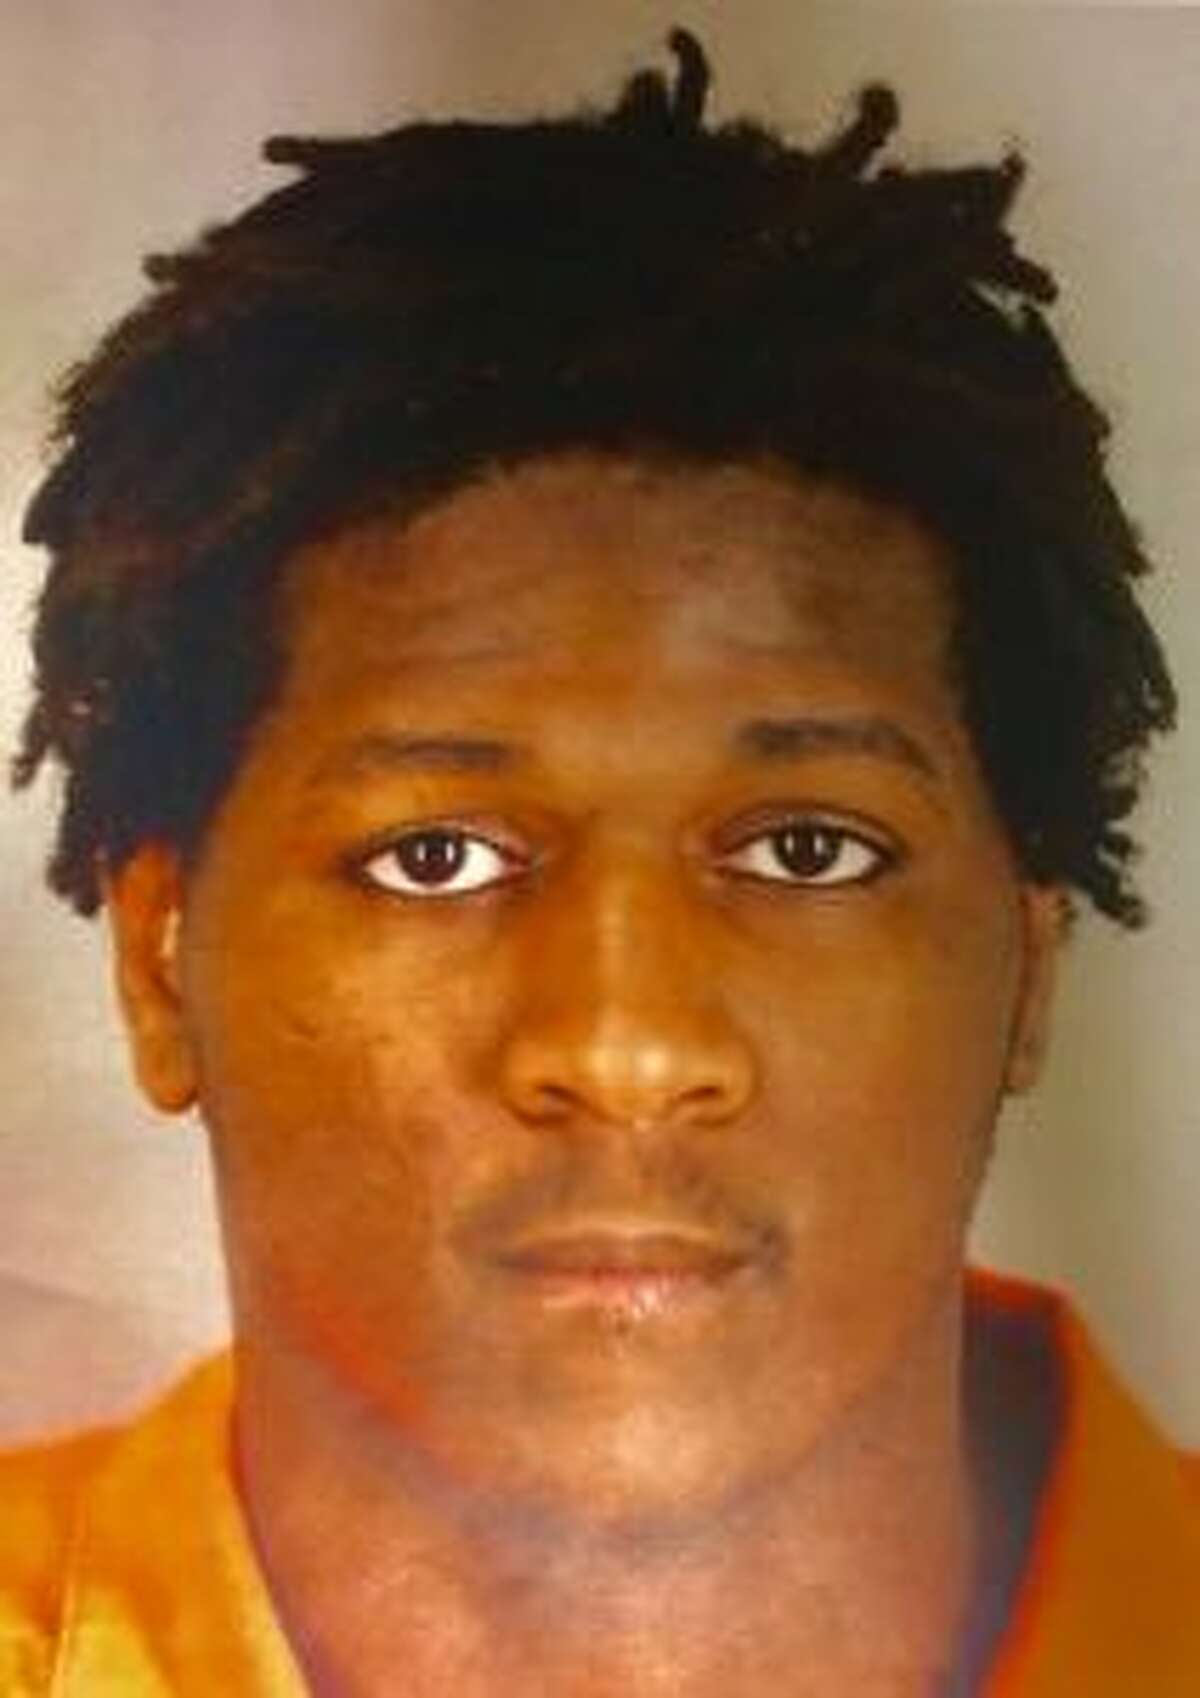 Desmond Bennett, 22, is charged with murder. Photo provided by Beaumont Police.